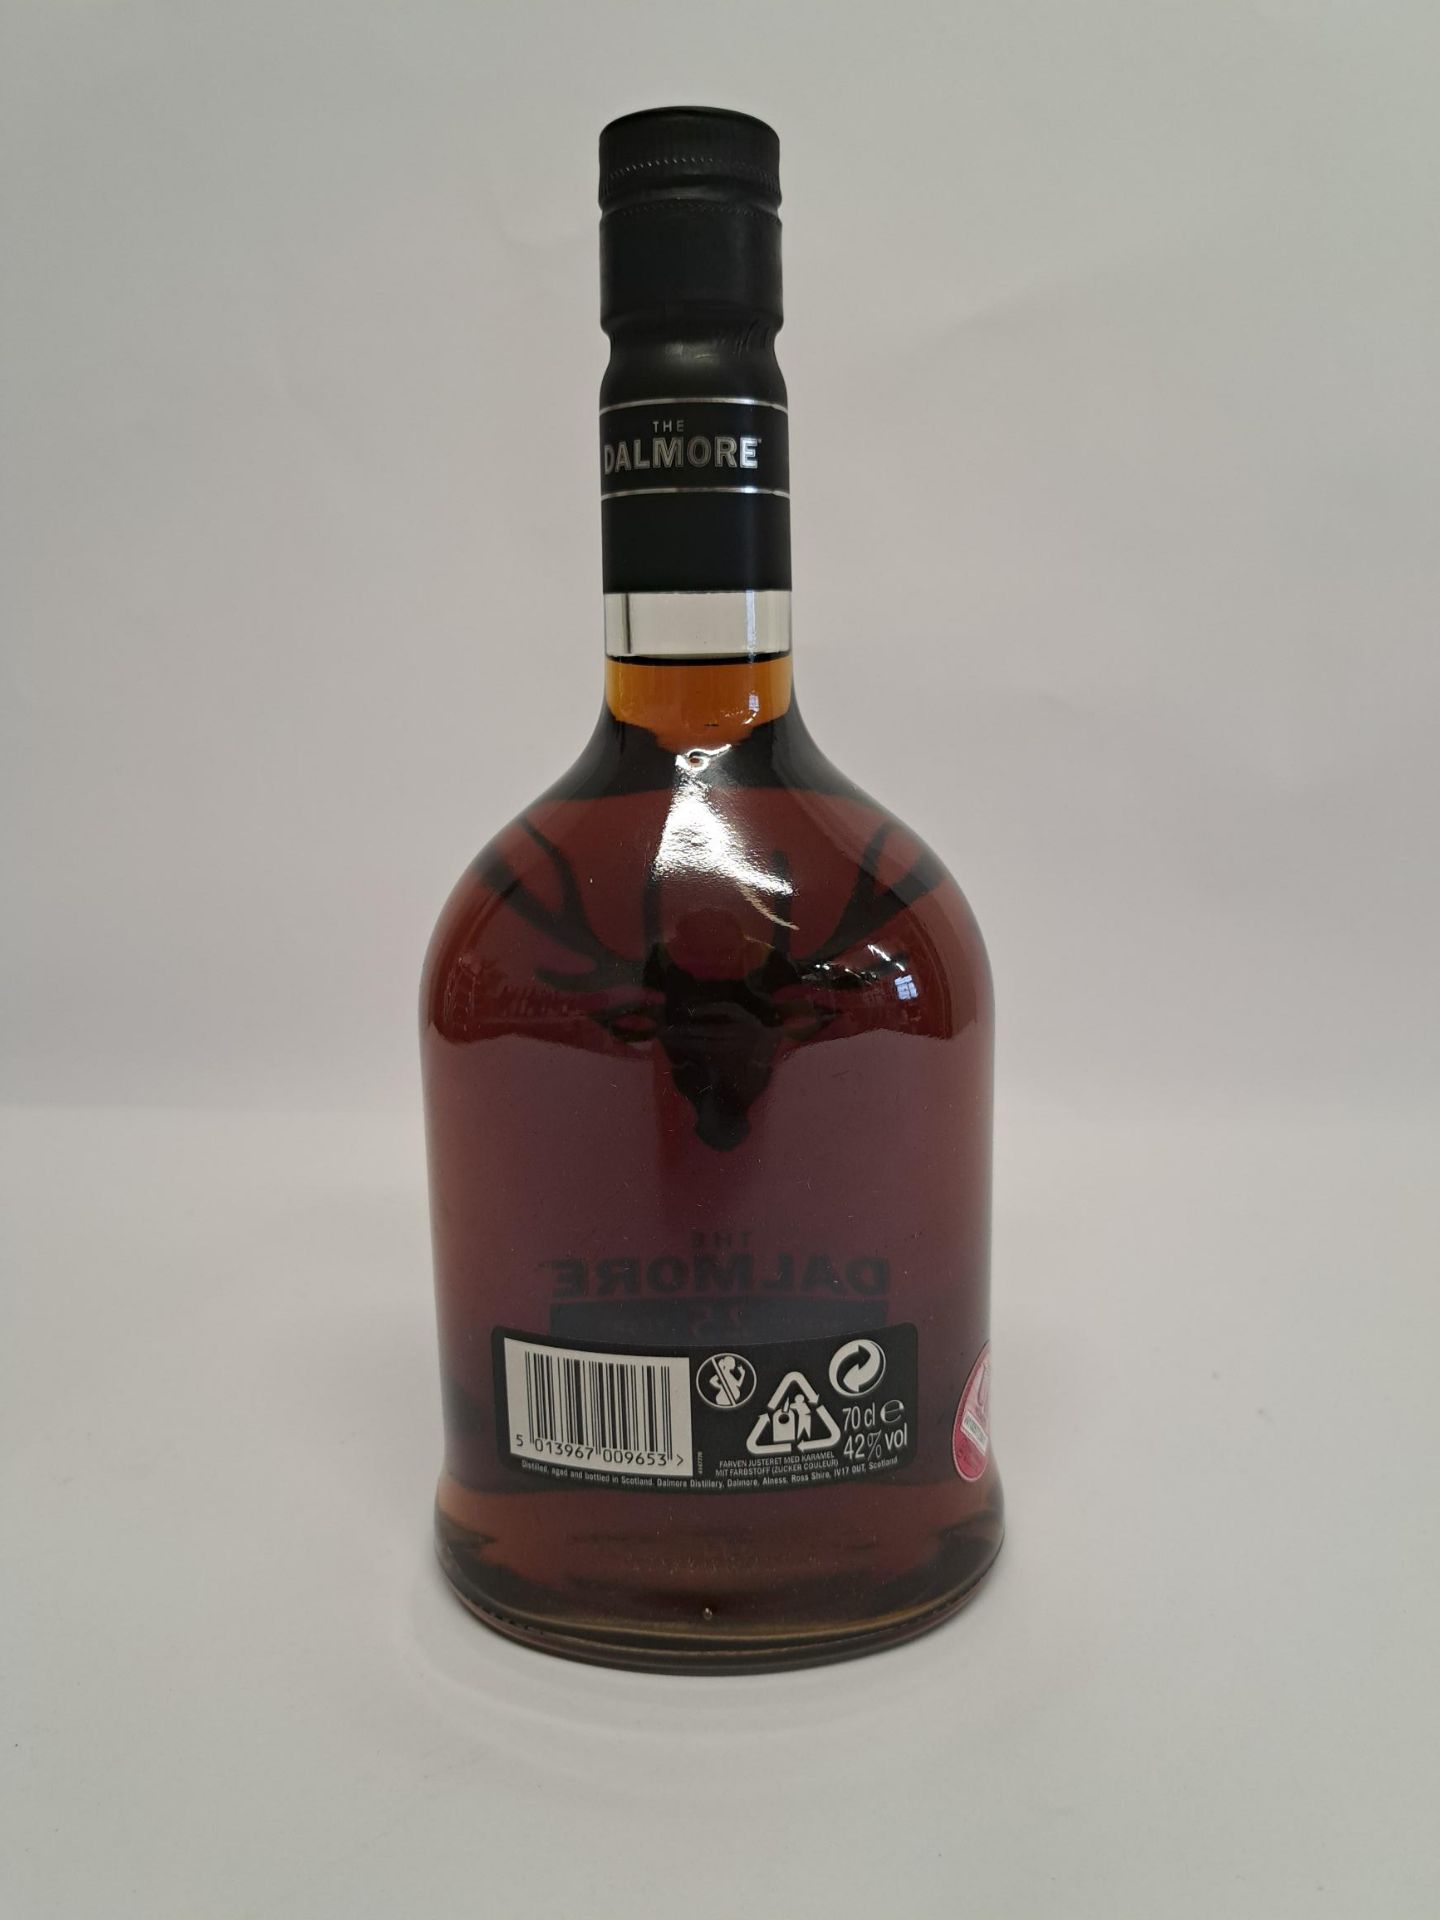 The Dalmore Aged 25 Year Highland Single Malt Scotch Whisky 700ml. Box Unsealed By Staff Member to c - Image 3 of 8